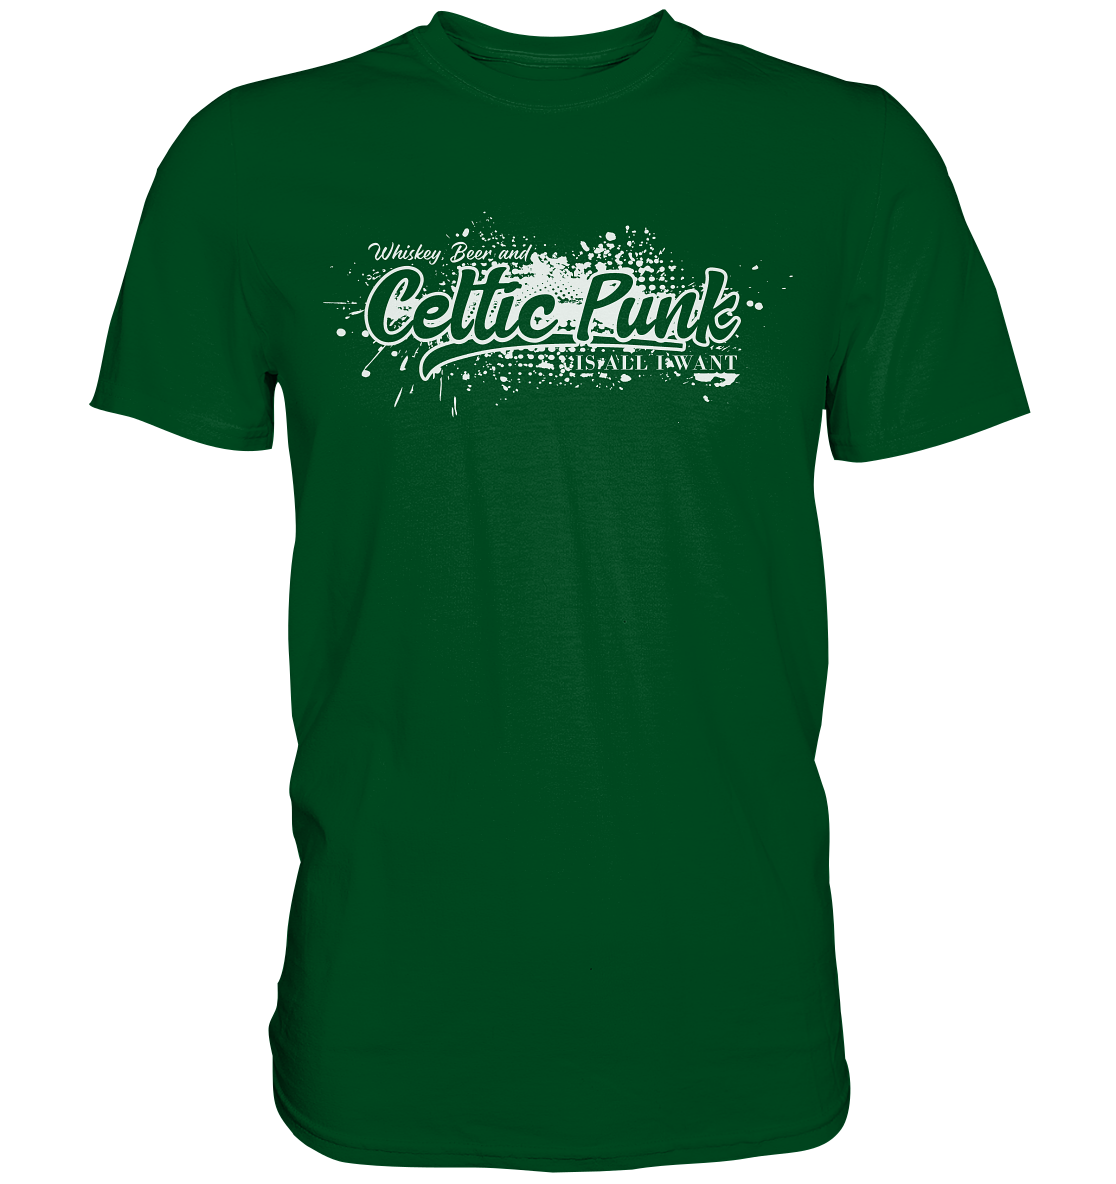 Whiskey, Beer And Celtic Punk "Is All I Want" - Premium Shirt